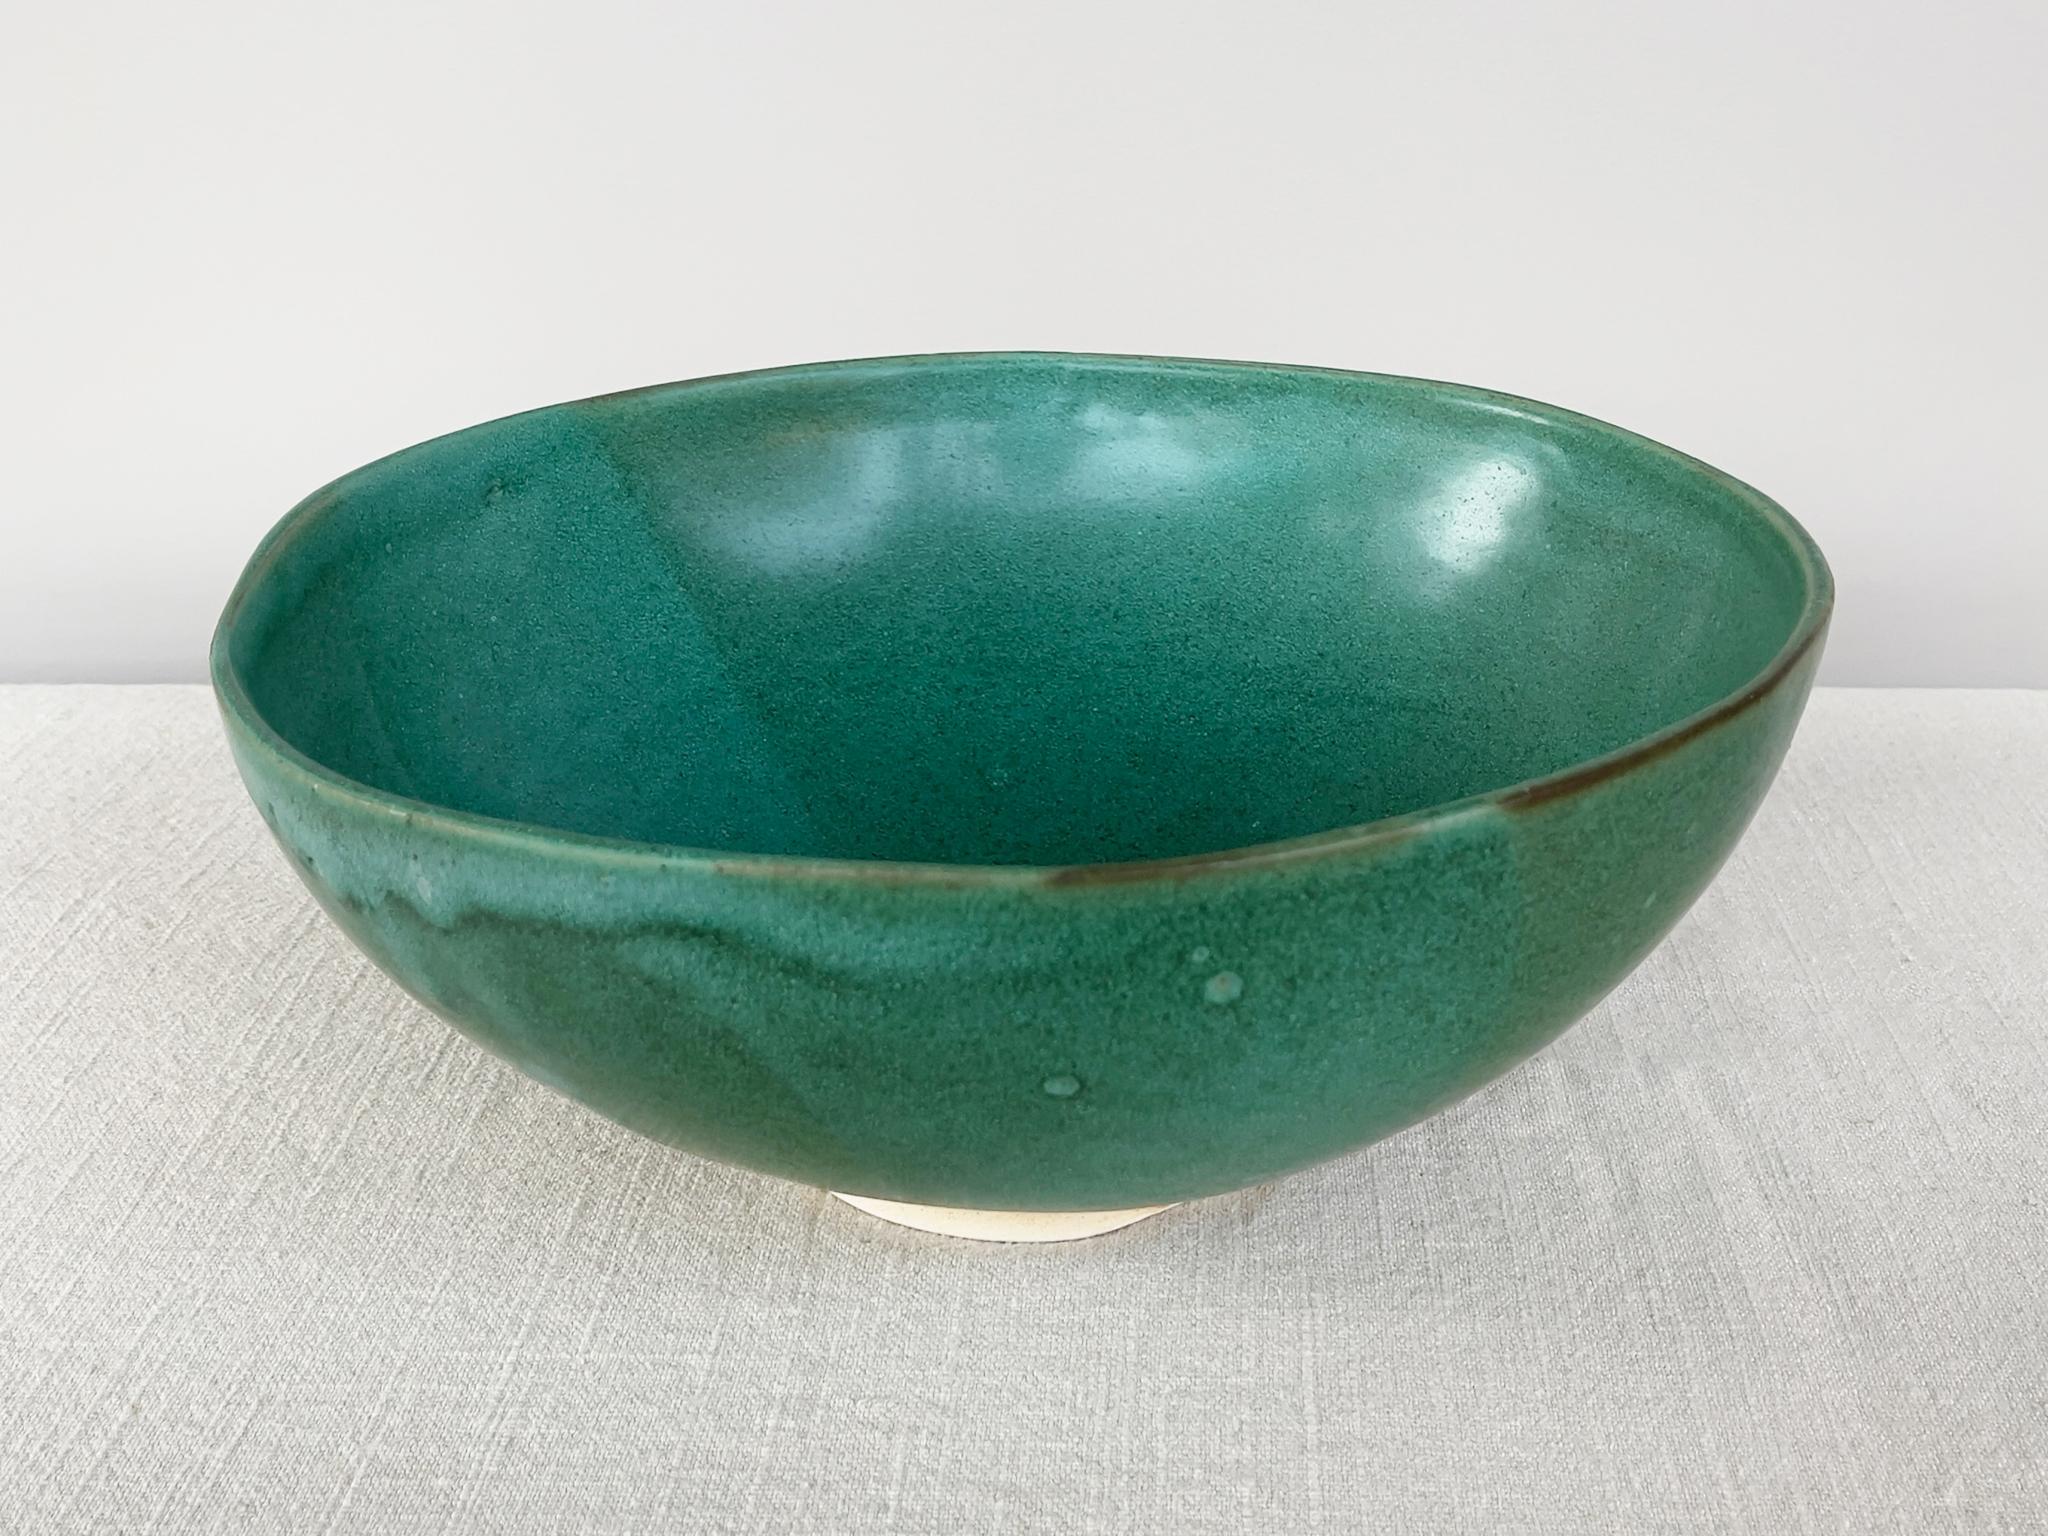 Glazed Thom Lussier Ceramic Bowl #23, From the Oxidized Copper Collection Description For Sale